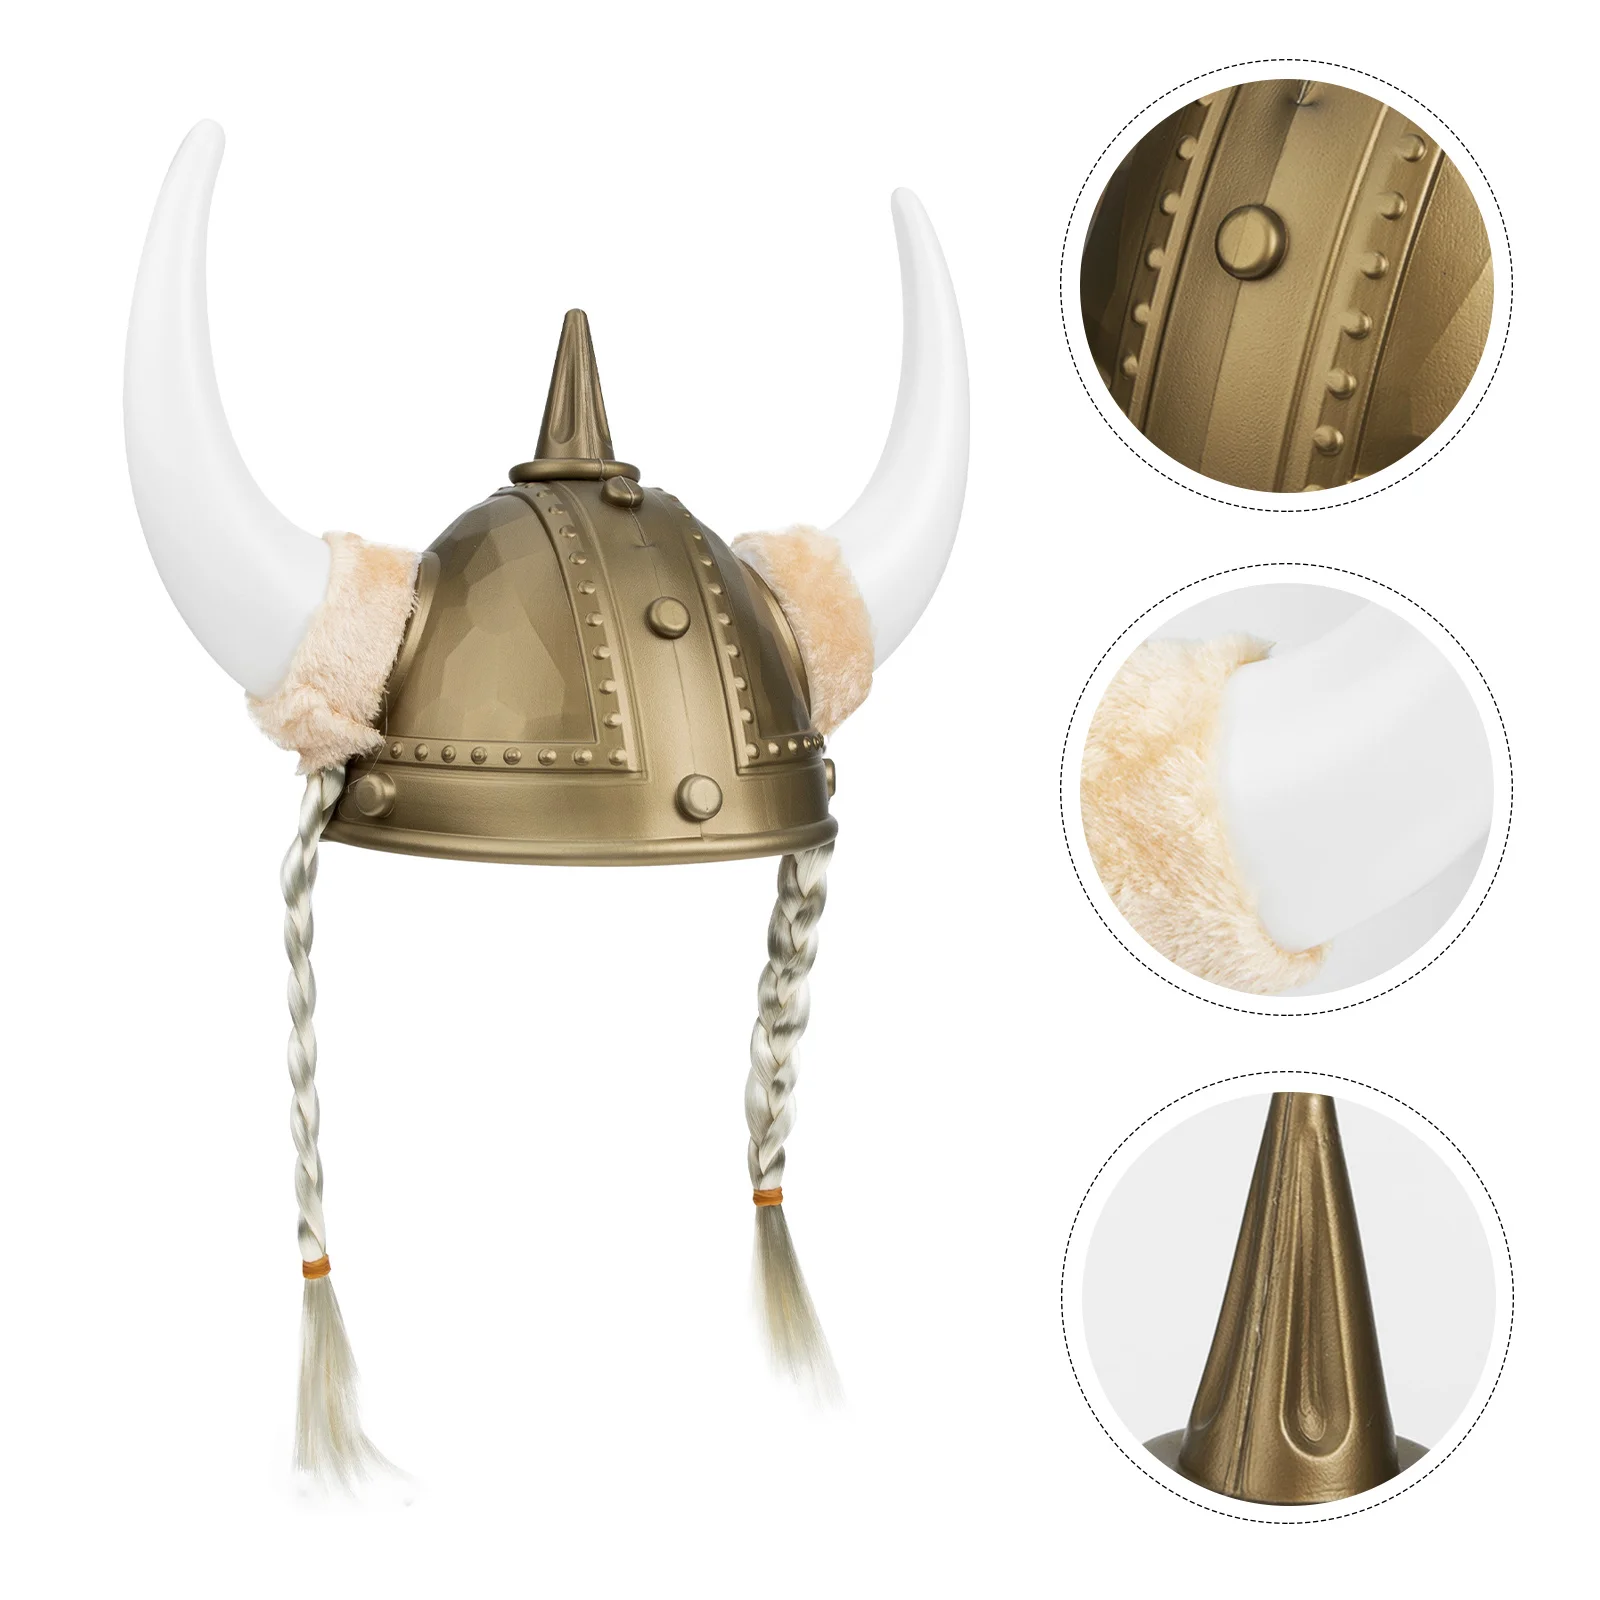 

Rome Ox Horn Hat Masquerade Decor Dance Performance Prop Party Viking Costume Accessory Mens Headbands